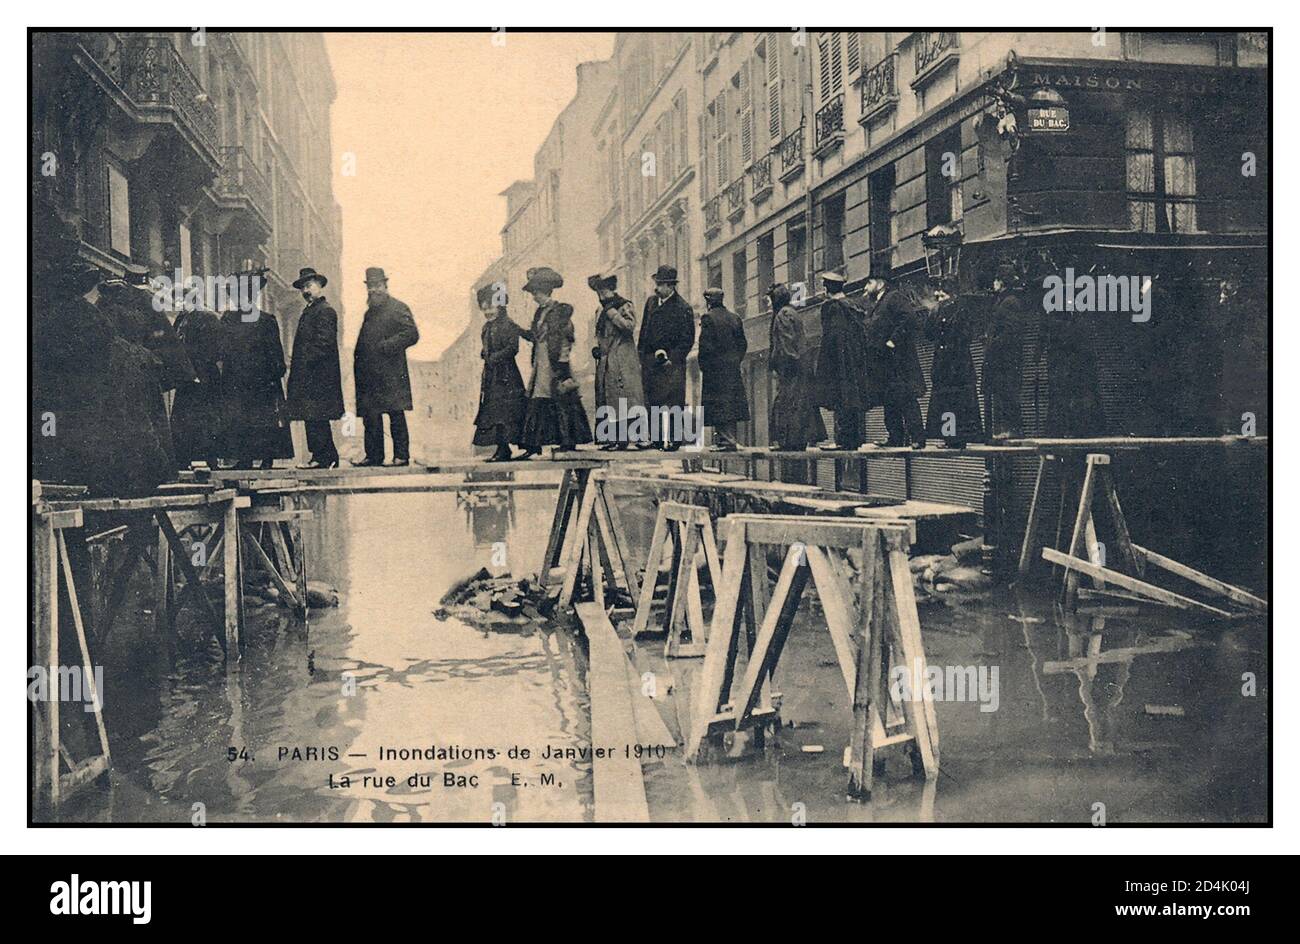 GREAT FLOOD PARIS 1910 La Rue du Bac PARIS FRANCE Vintage archive historic French 1900’s stylish postcard of one of the great natural catastrophes in Parisian and French history: the Great Flood of January 1910, the likes of which Paris had not seen since 1658. Torrential rain and snow floods most of Paris France Stock Photo